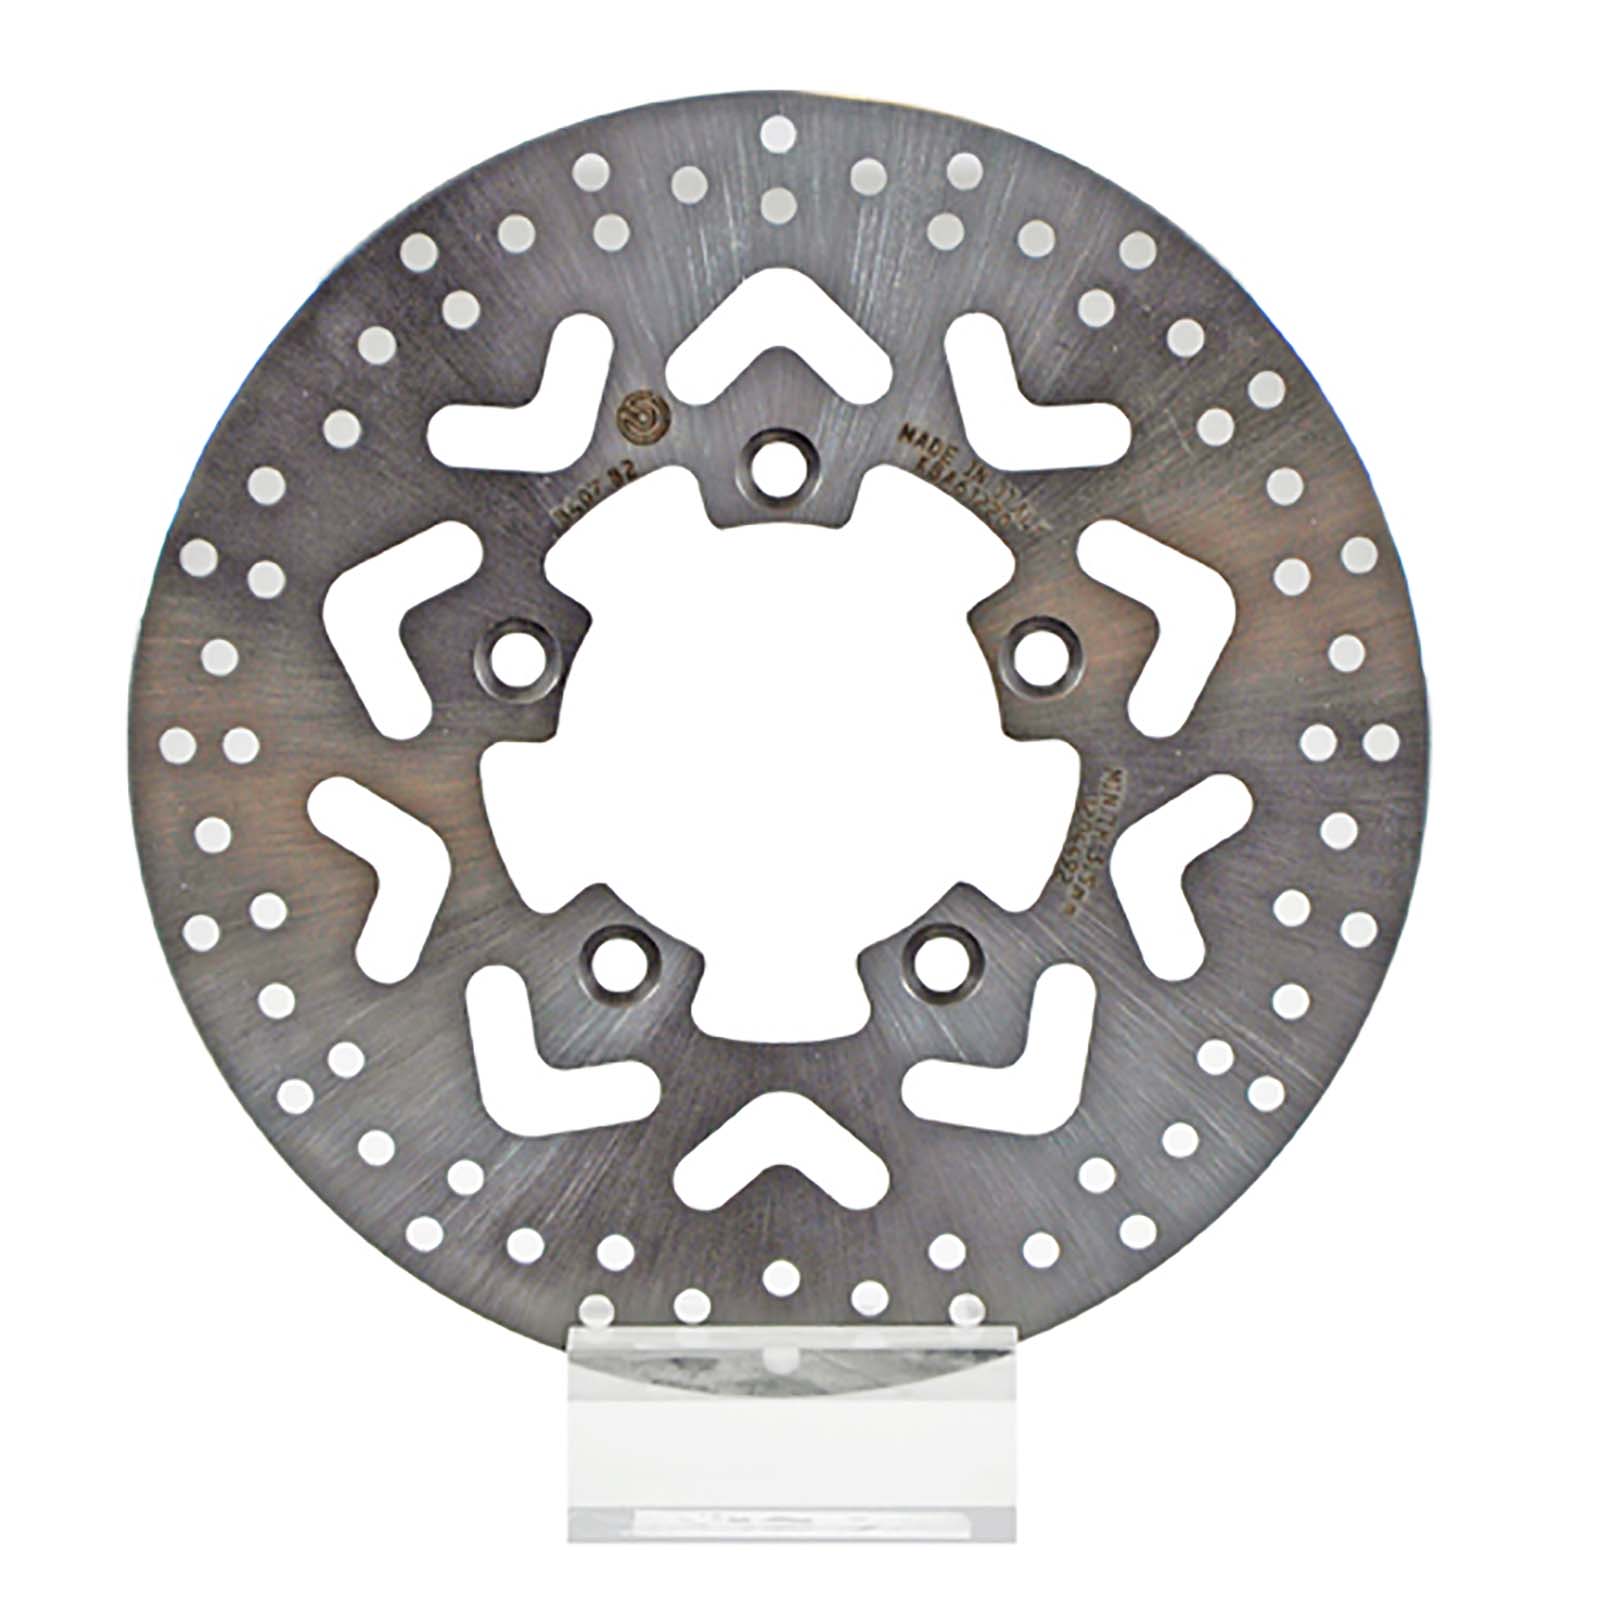 BREMBO DISQUE DE FREIN FIXE ARRIERE OR POUR KYMCO PEOPLE S I 08-10